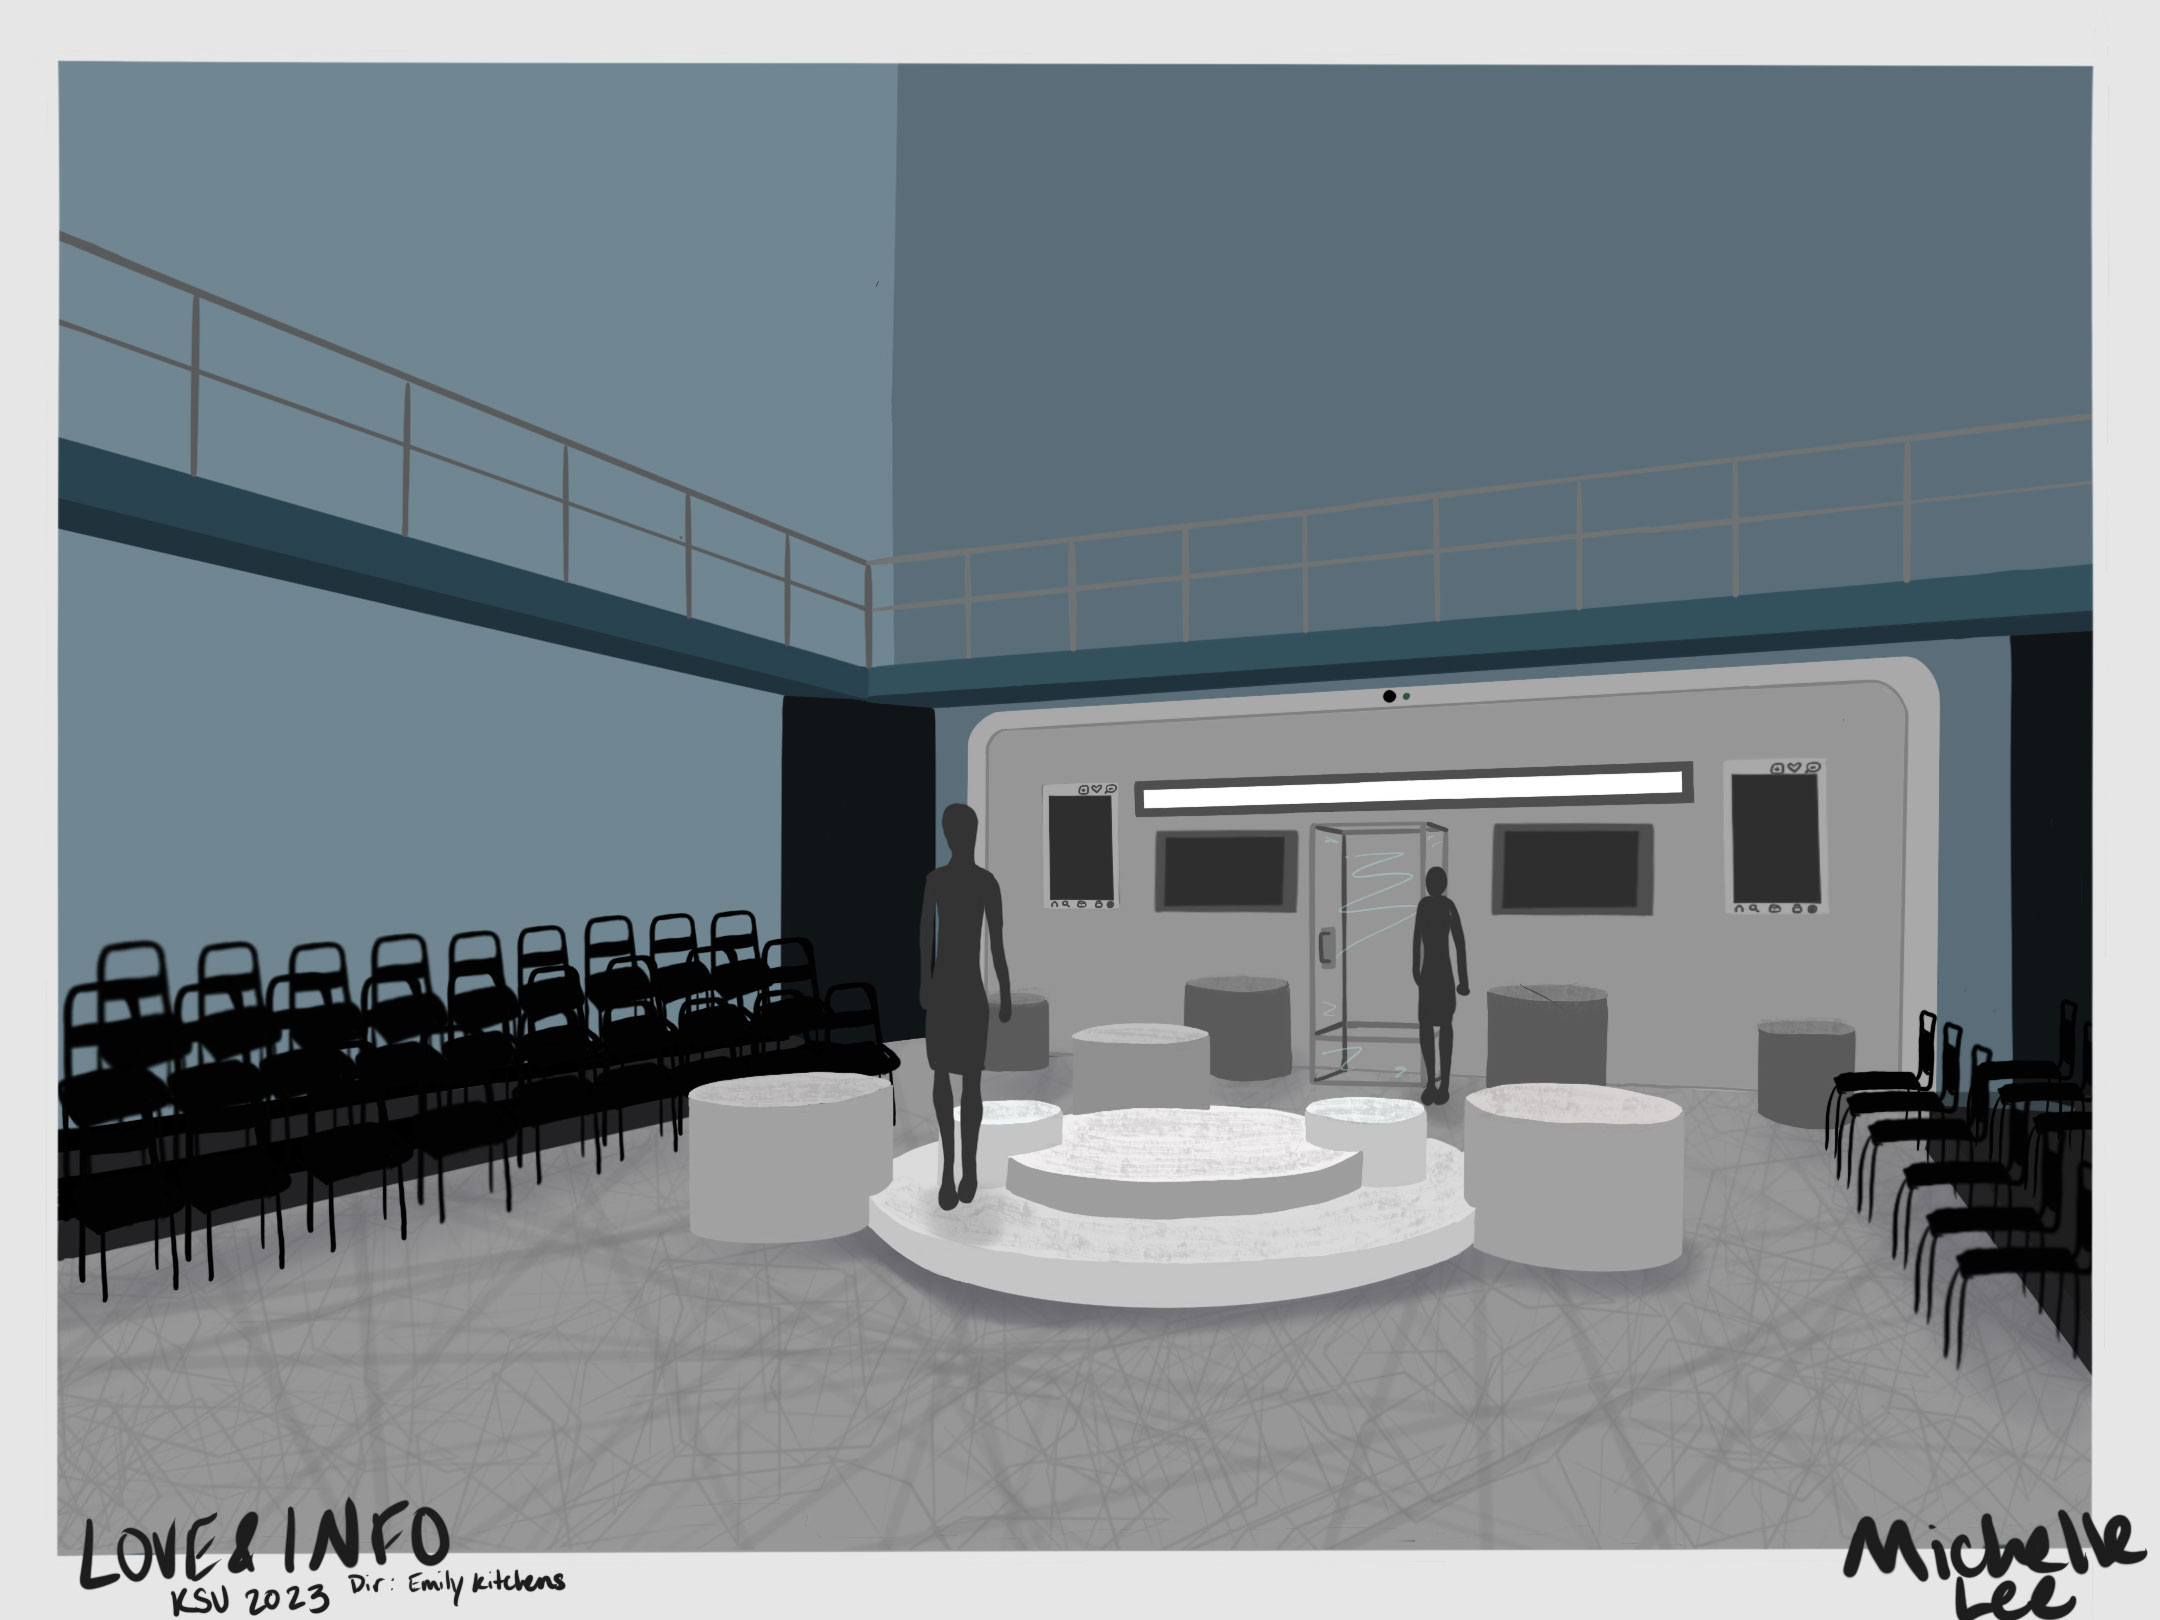 image of set design in the Onyx Theatre